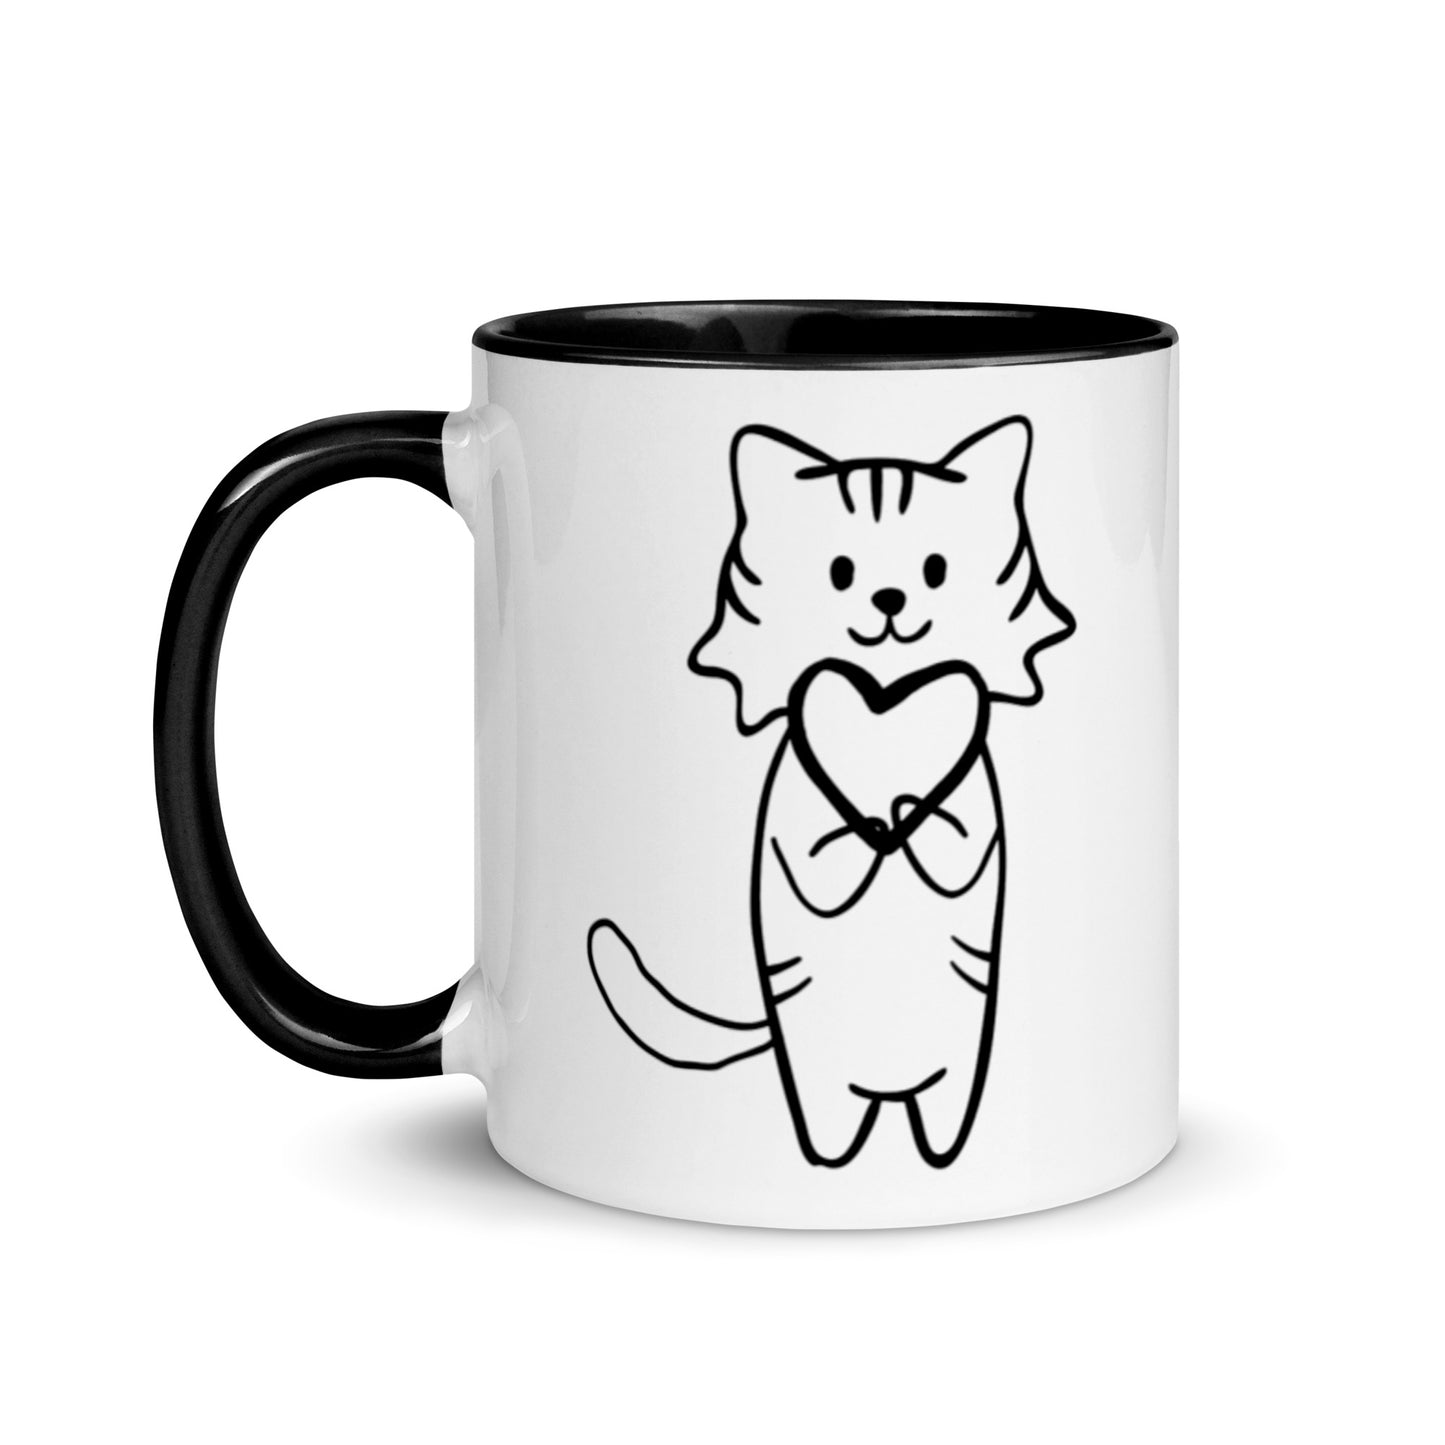 Paw-sitive Vibes Only Mug cat image